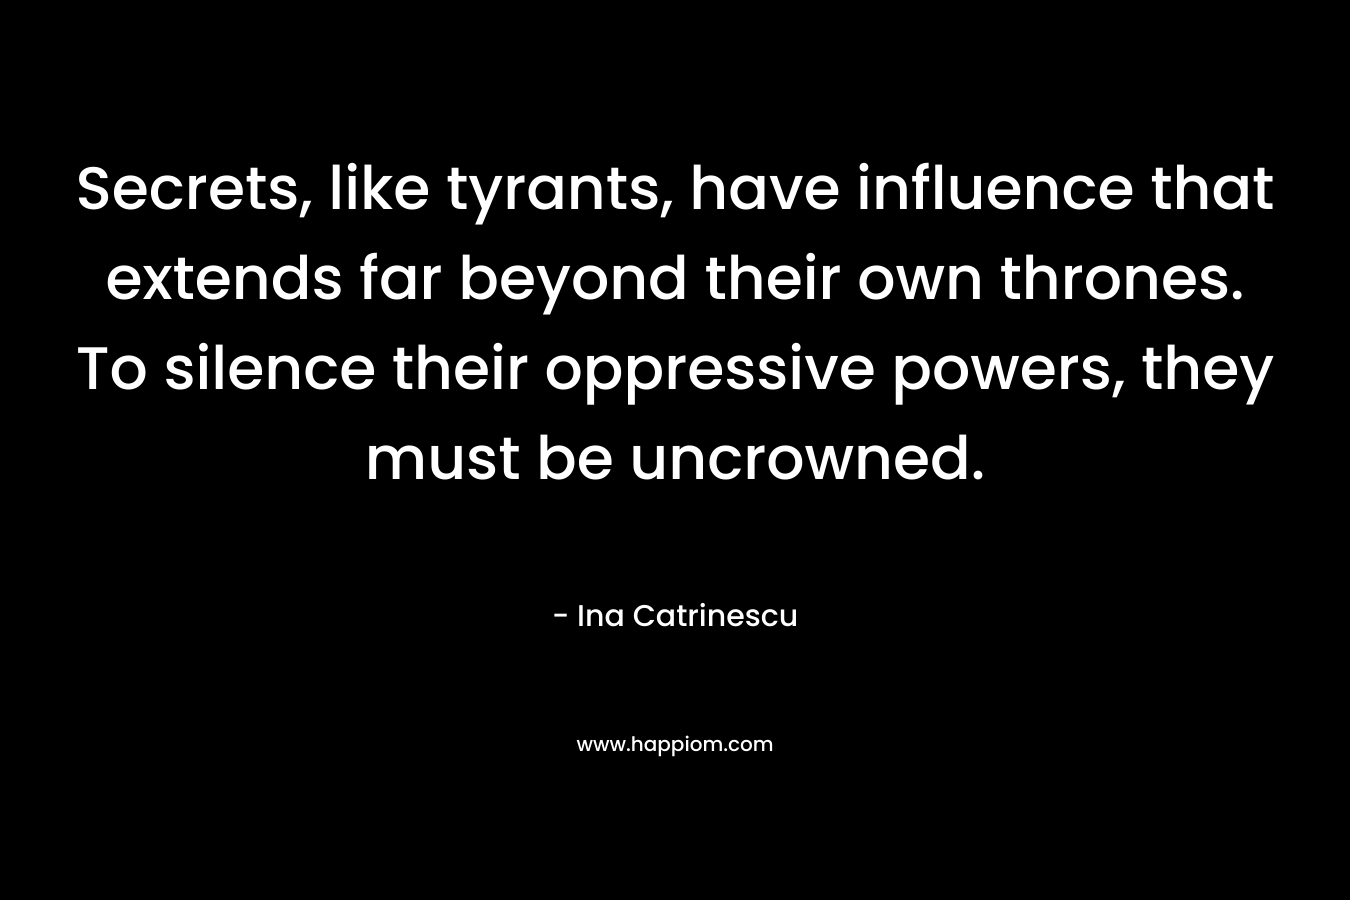 Secrets, like tyrants, have influence that extends far beyond their own thrones. To silence their oppressive powers, they must be uncrowned. – Ina Catrinescu